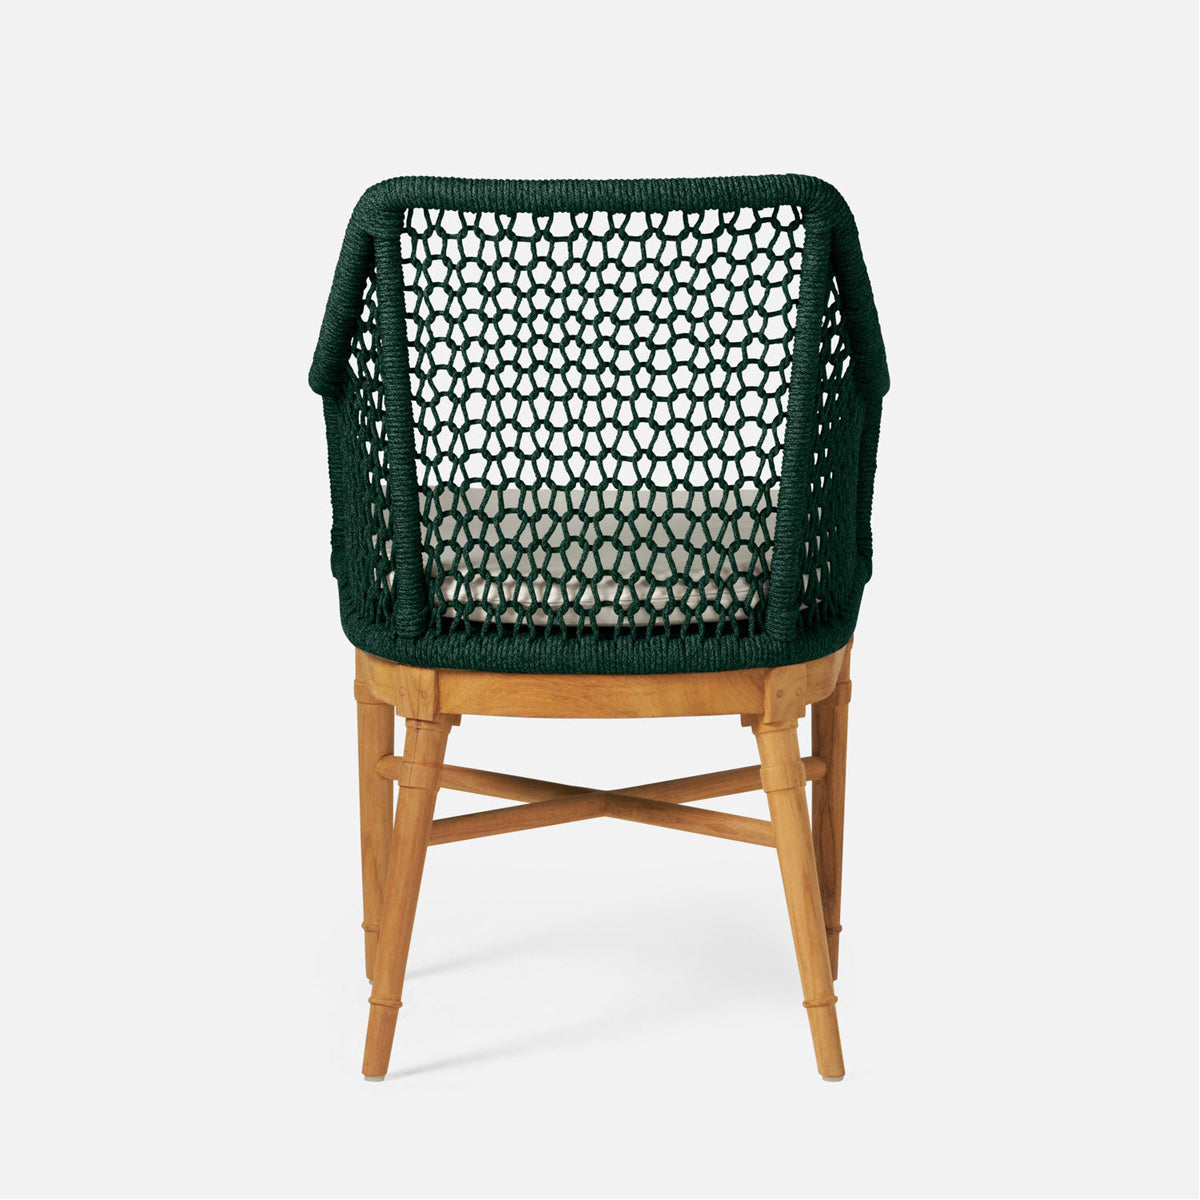 Made Goods Chadwick Woven Rope Outdoor Arm Chair in Weser Fabric